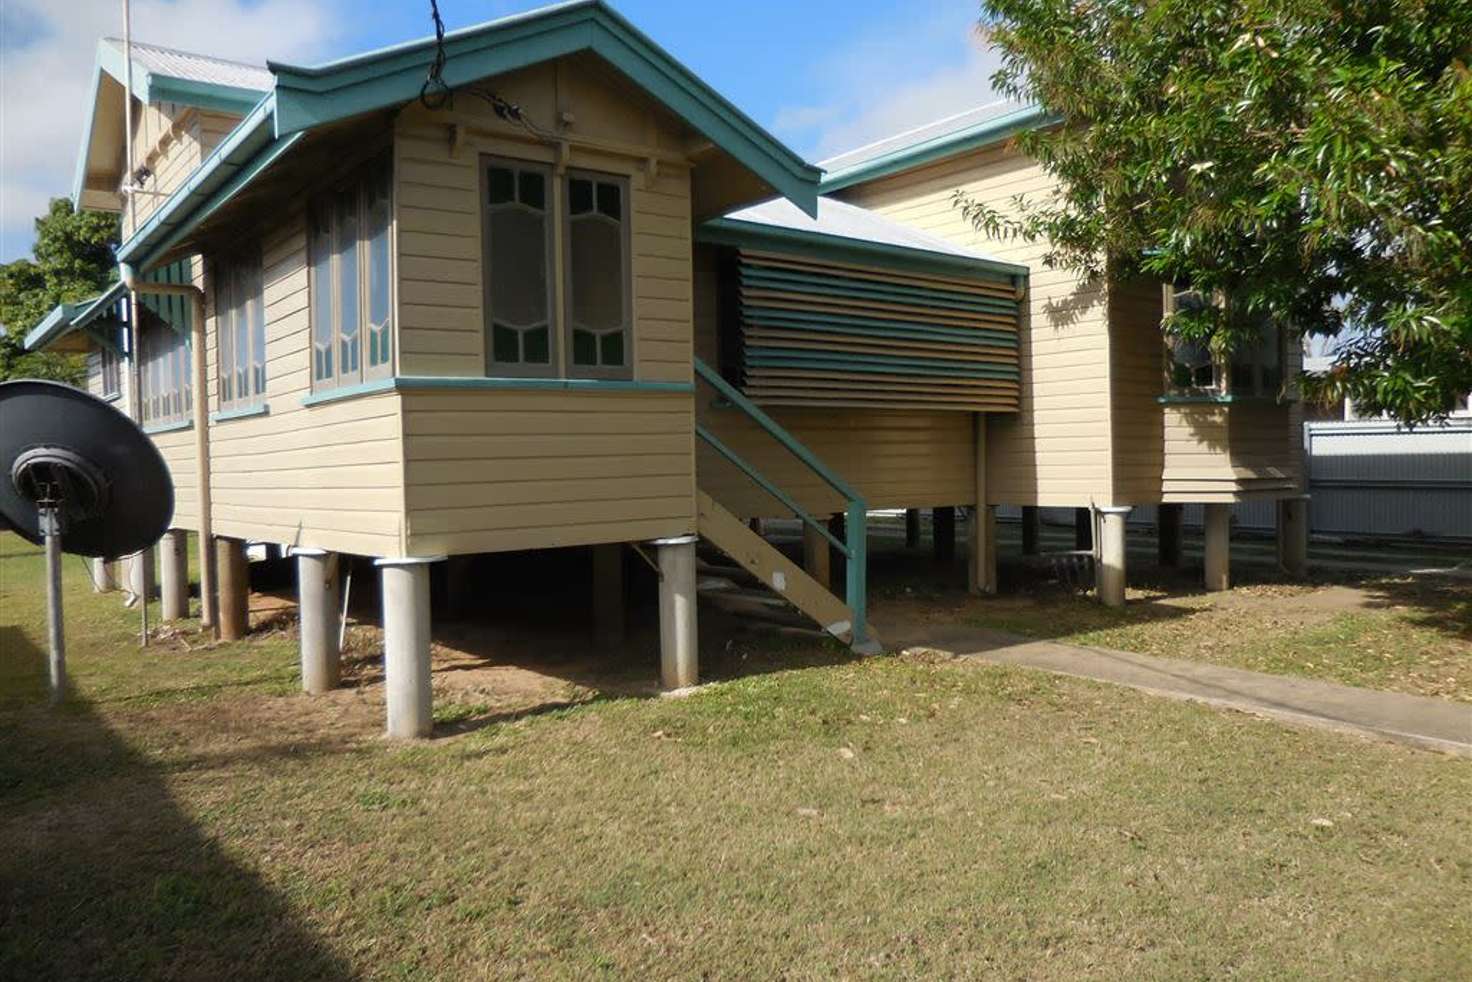 Main view of Homely house listing, 14 Munro Street, Ayr QLD 4807